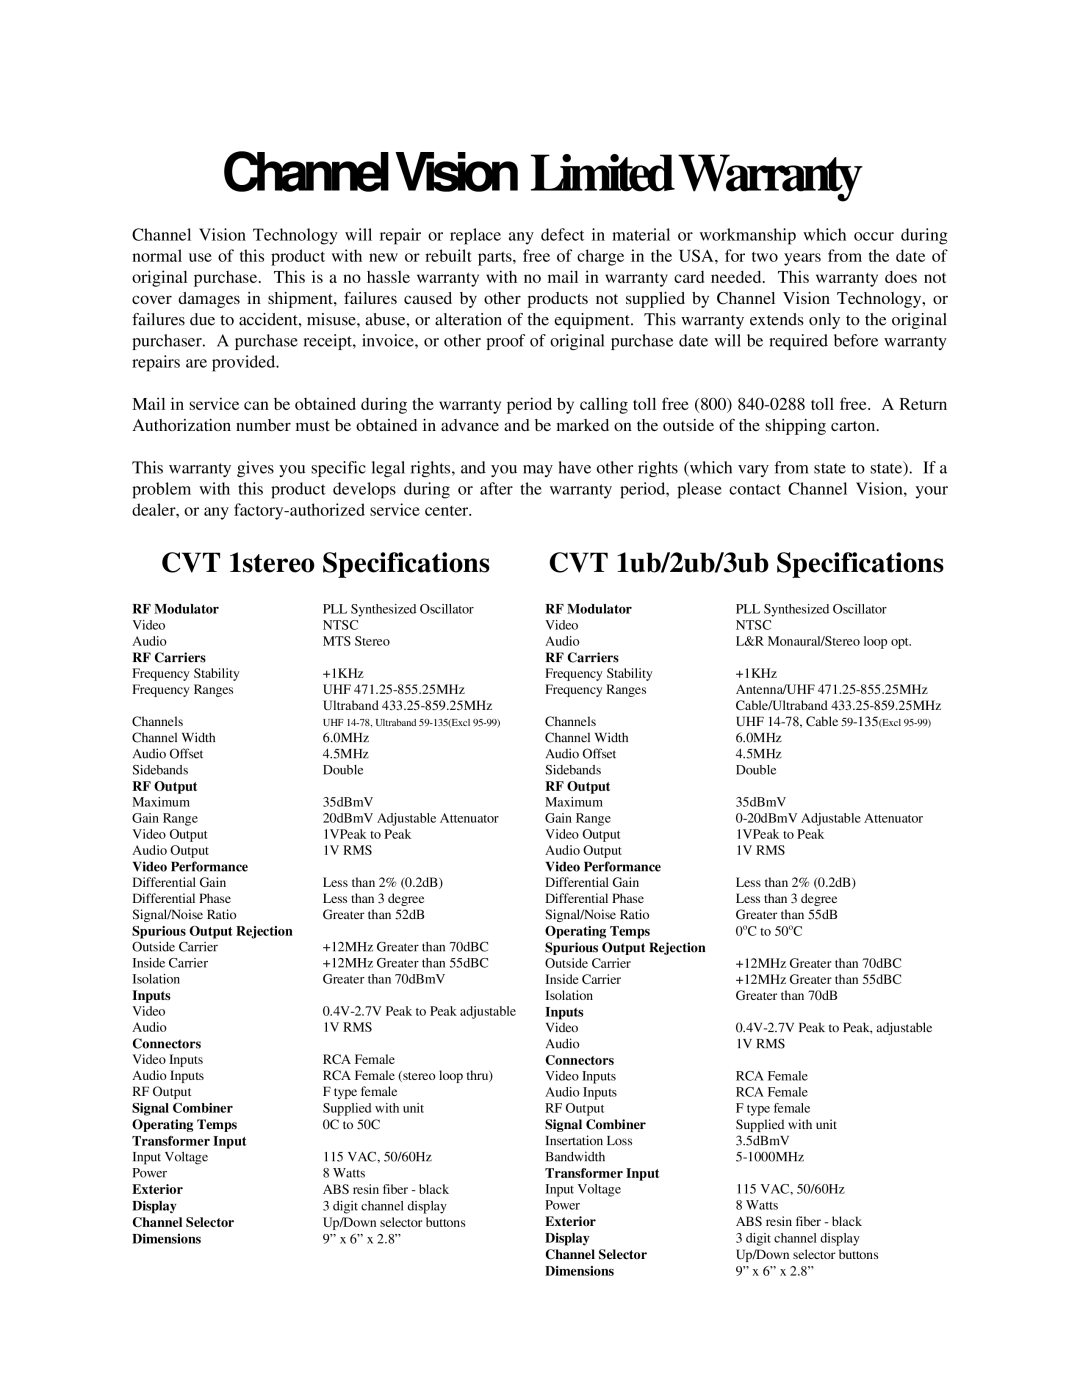 Channel Vision Stereo Receiver CVT 1stereo Specifications, CVT 1ub/2ub/3ub Specifications, ChannelVision LimitedWarranty 